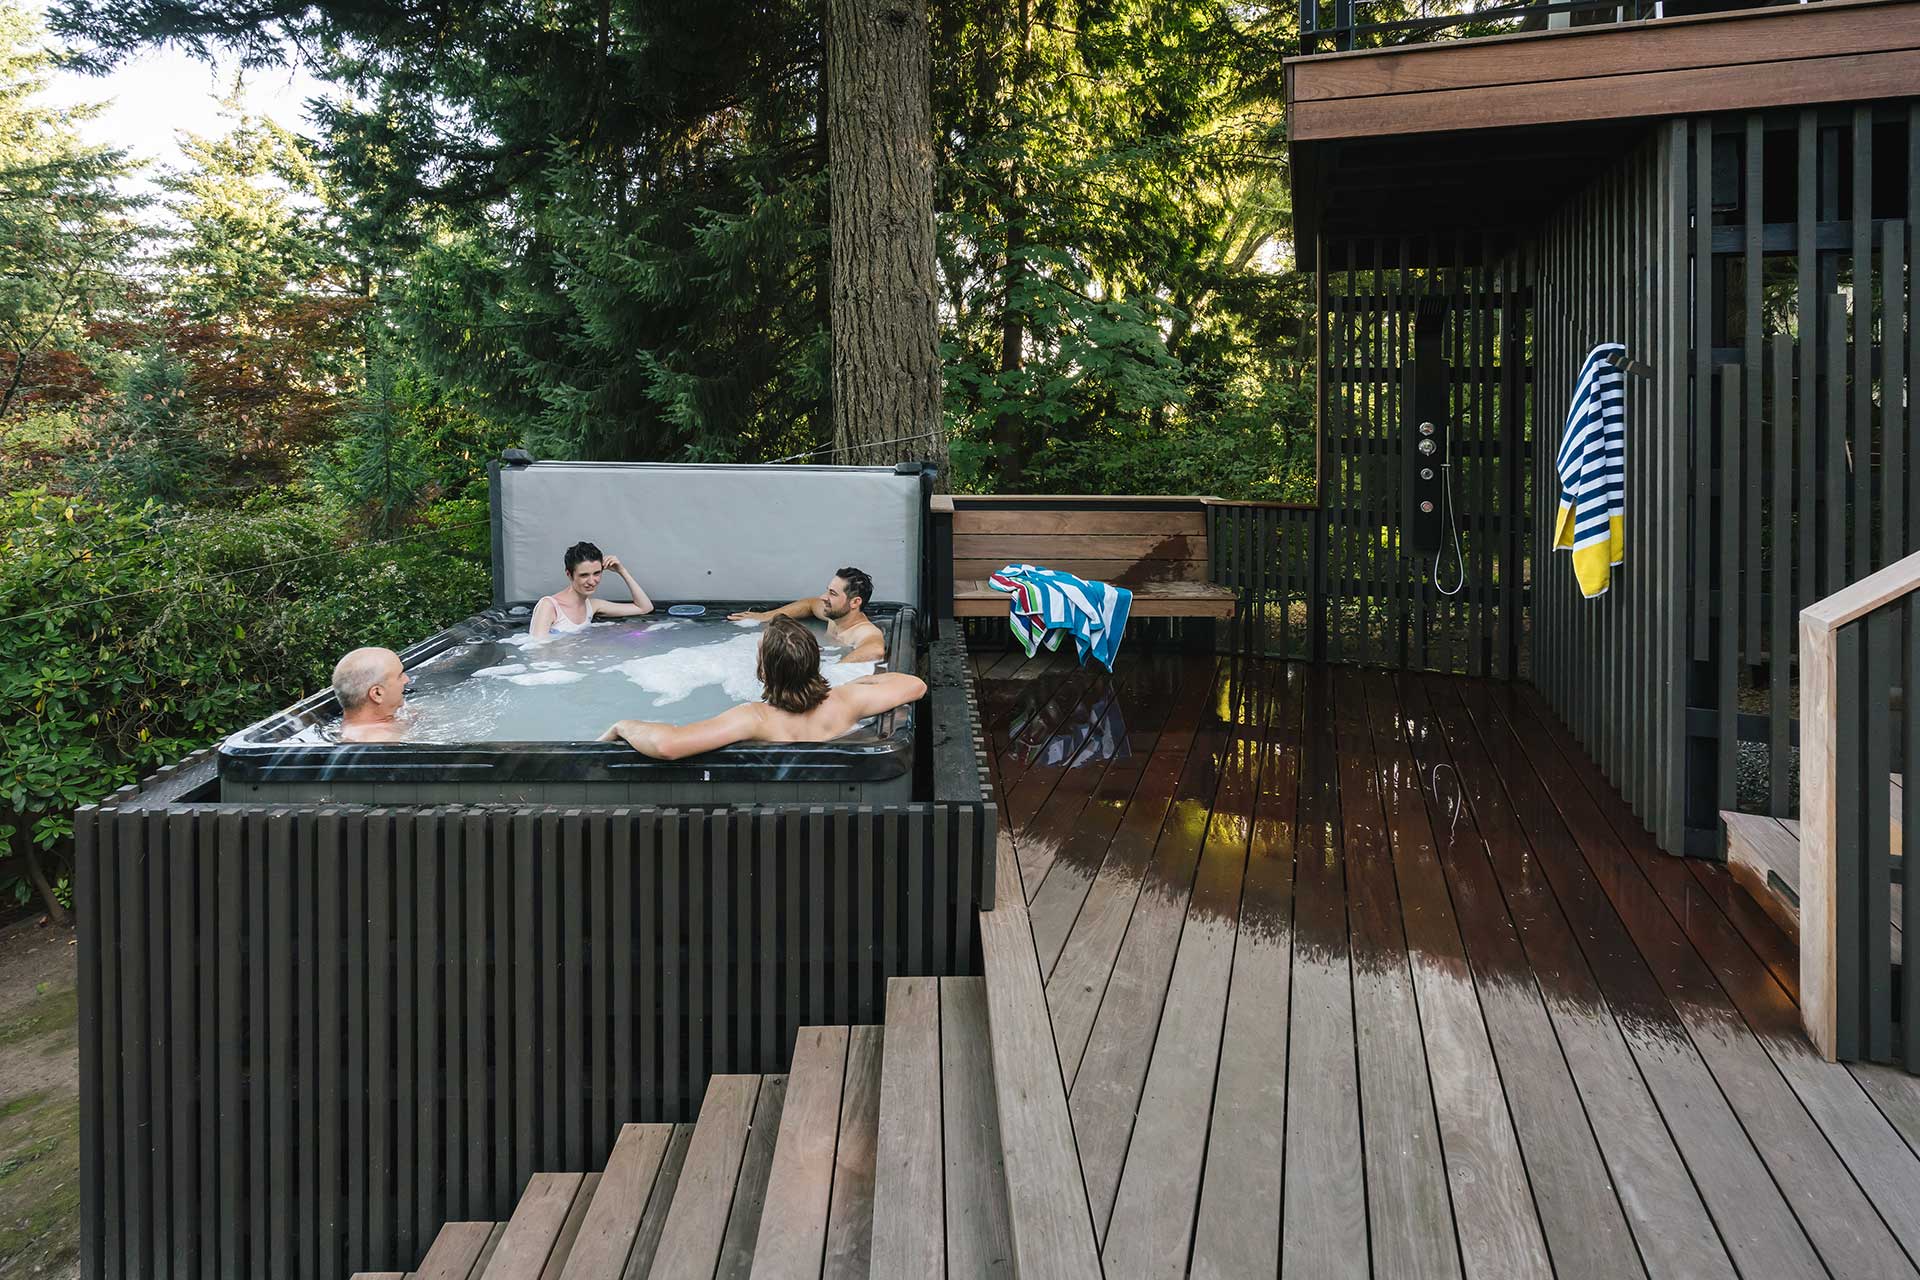 A hot tub is next to the outdoor shower on the lower level of the deck.